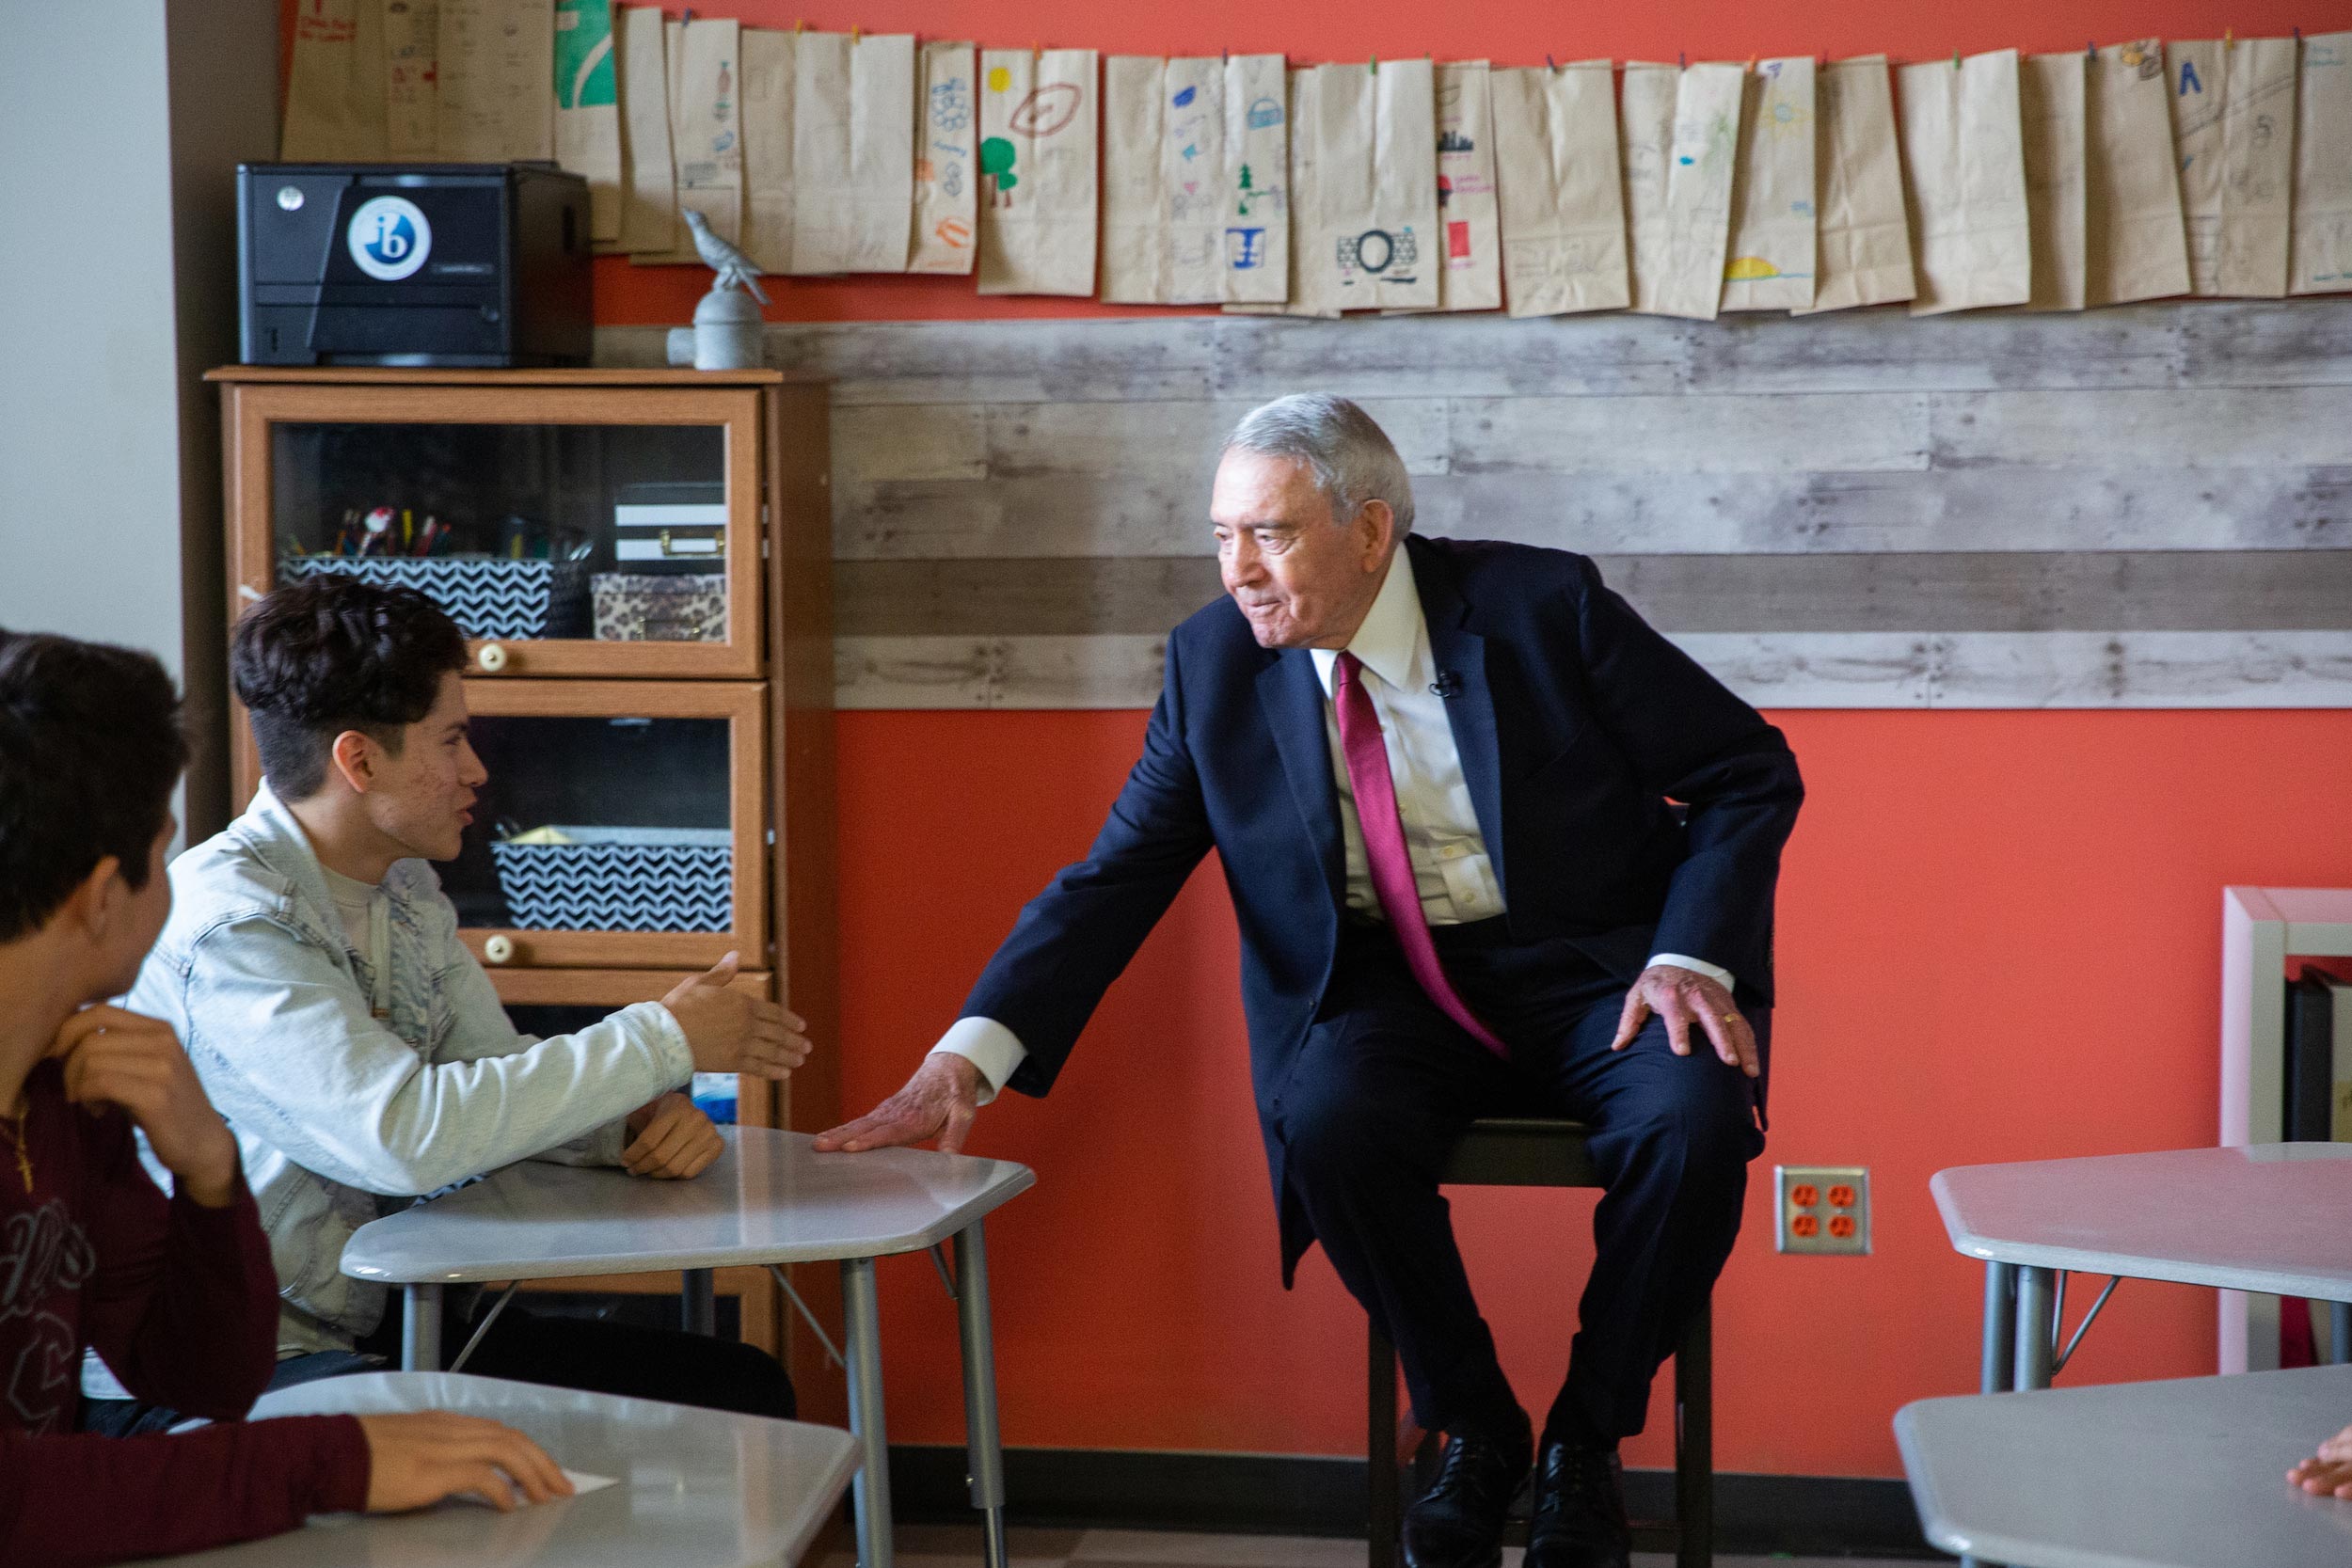 Dan Rather Answering a Student's Question